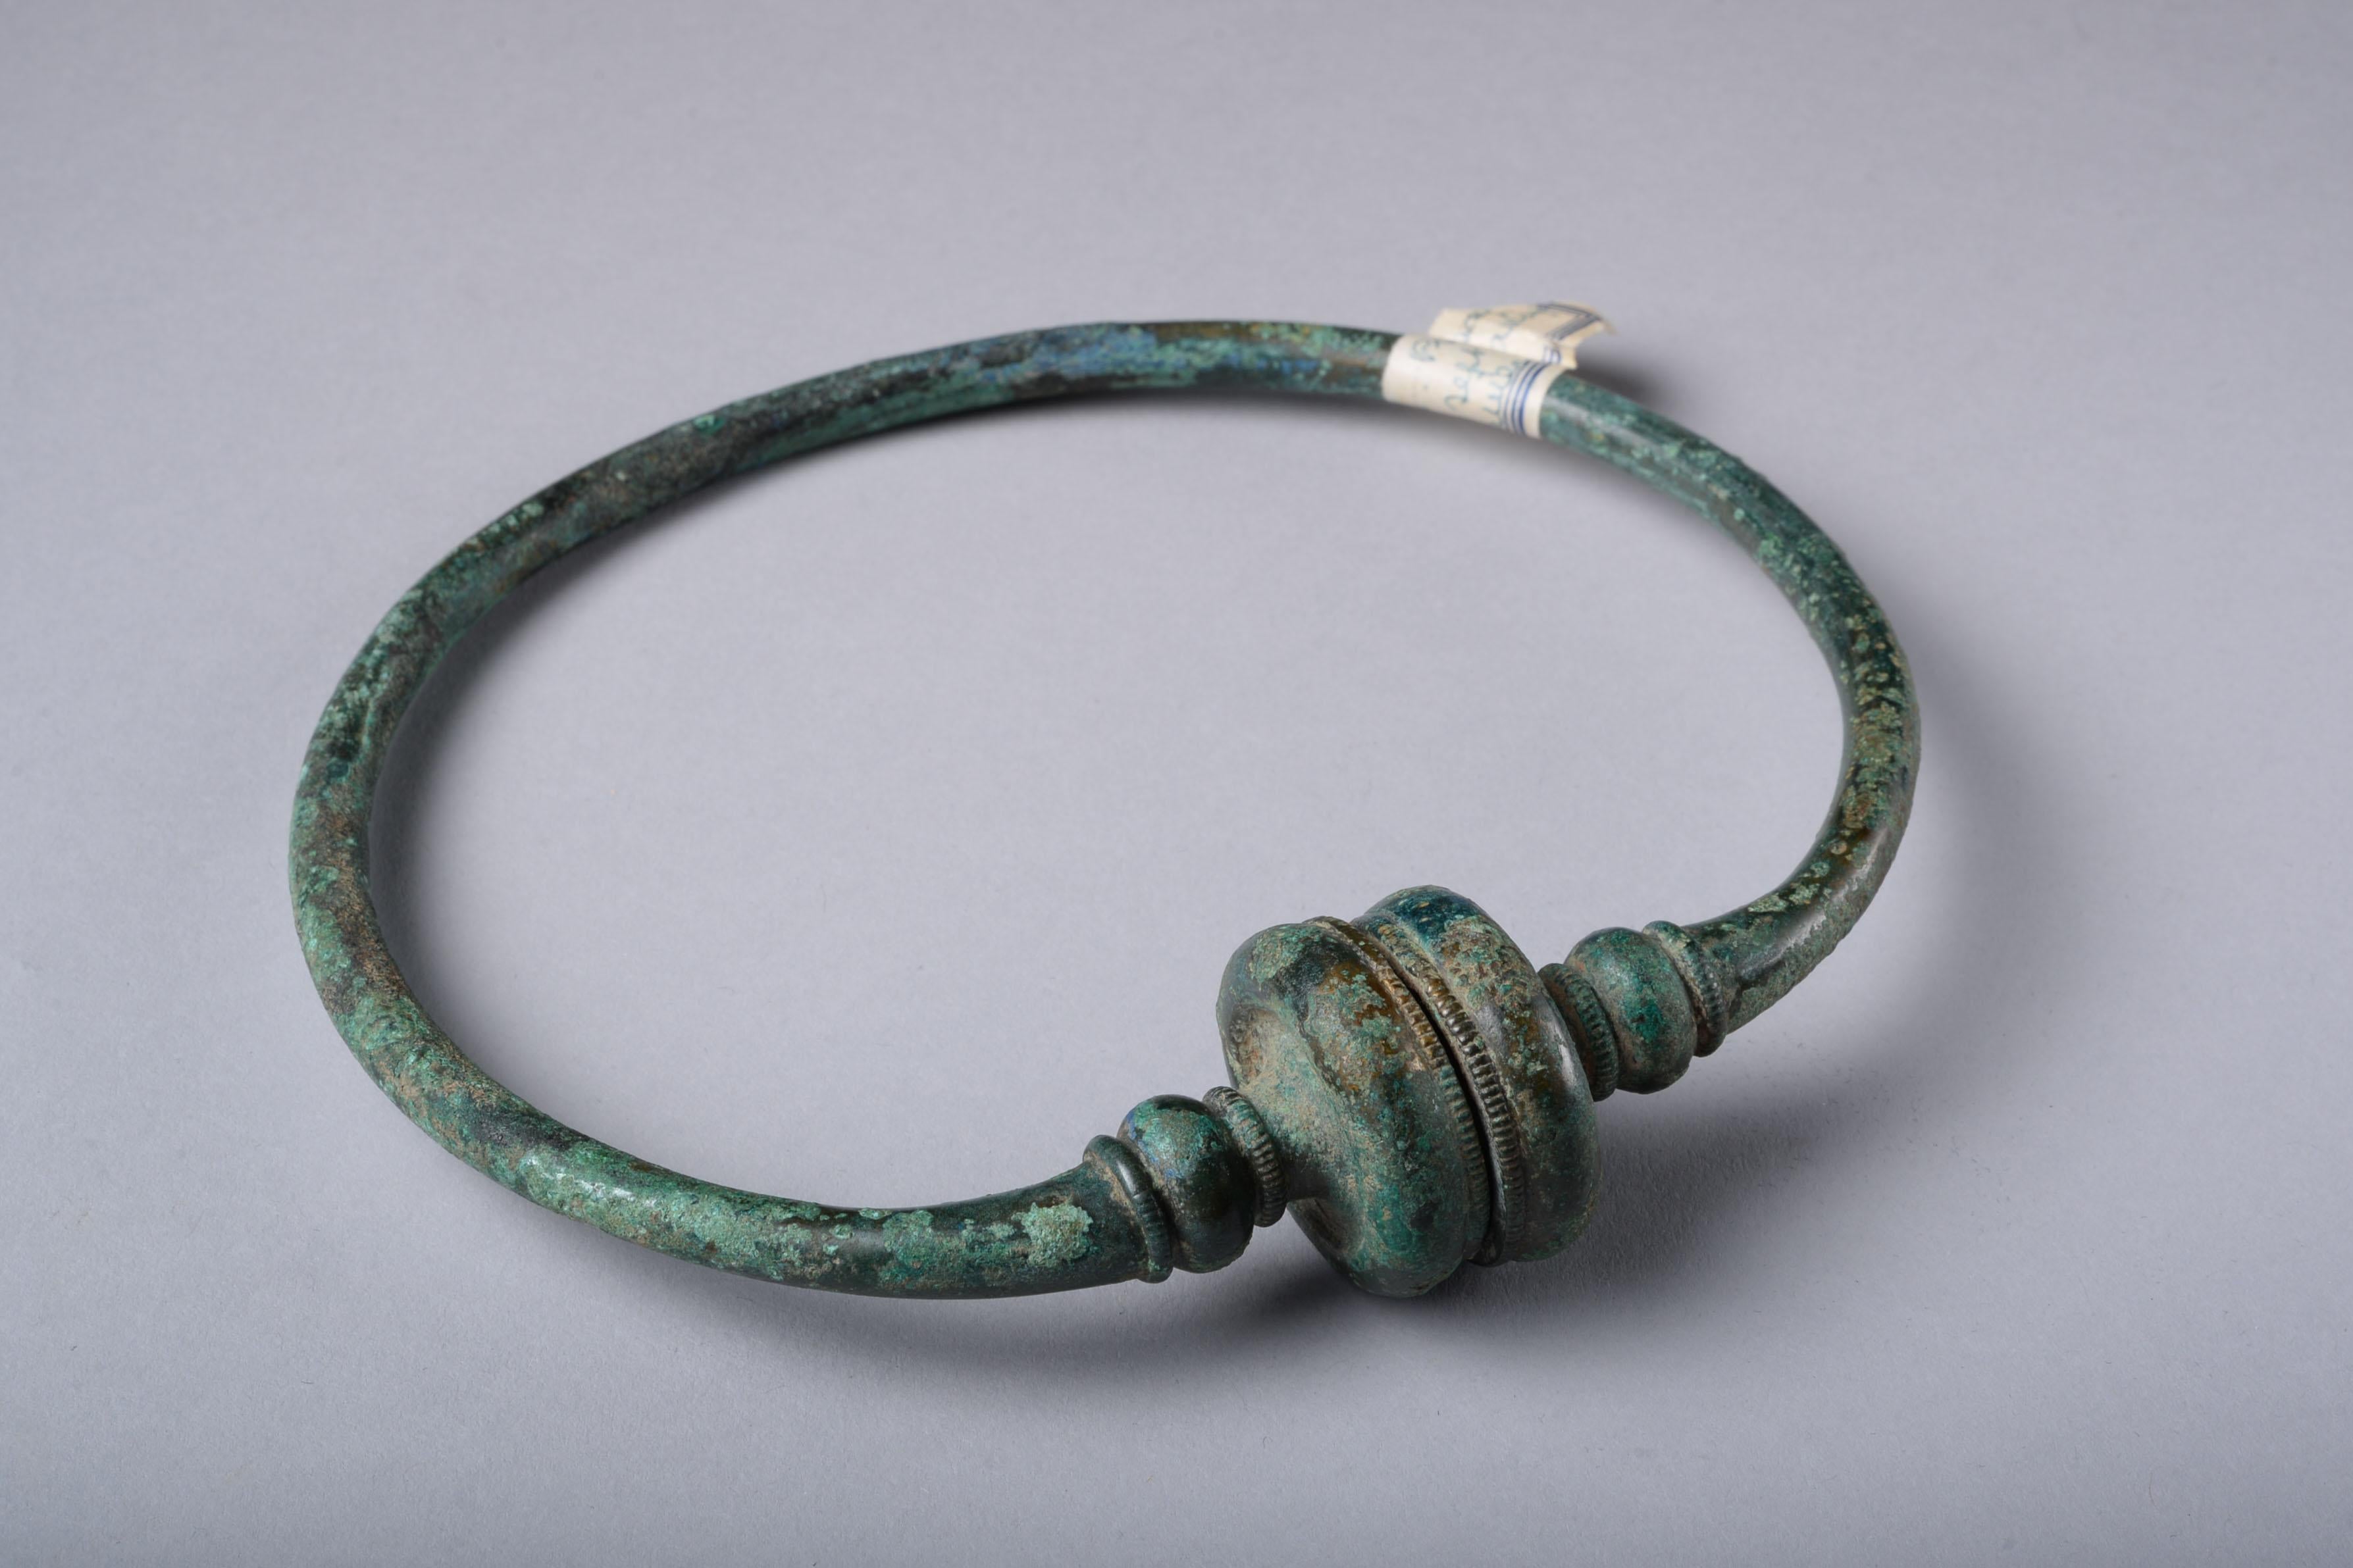 Celtic La Tène bronze torc, circa 350-150 BC.

With a circular hoop widening subtly at the front, two pronounced bands flanked by beaded collars, and with hollow terminals with notched sections.

Torcs were status objects worn around the neck by the